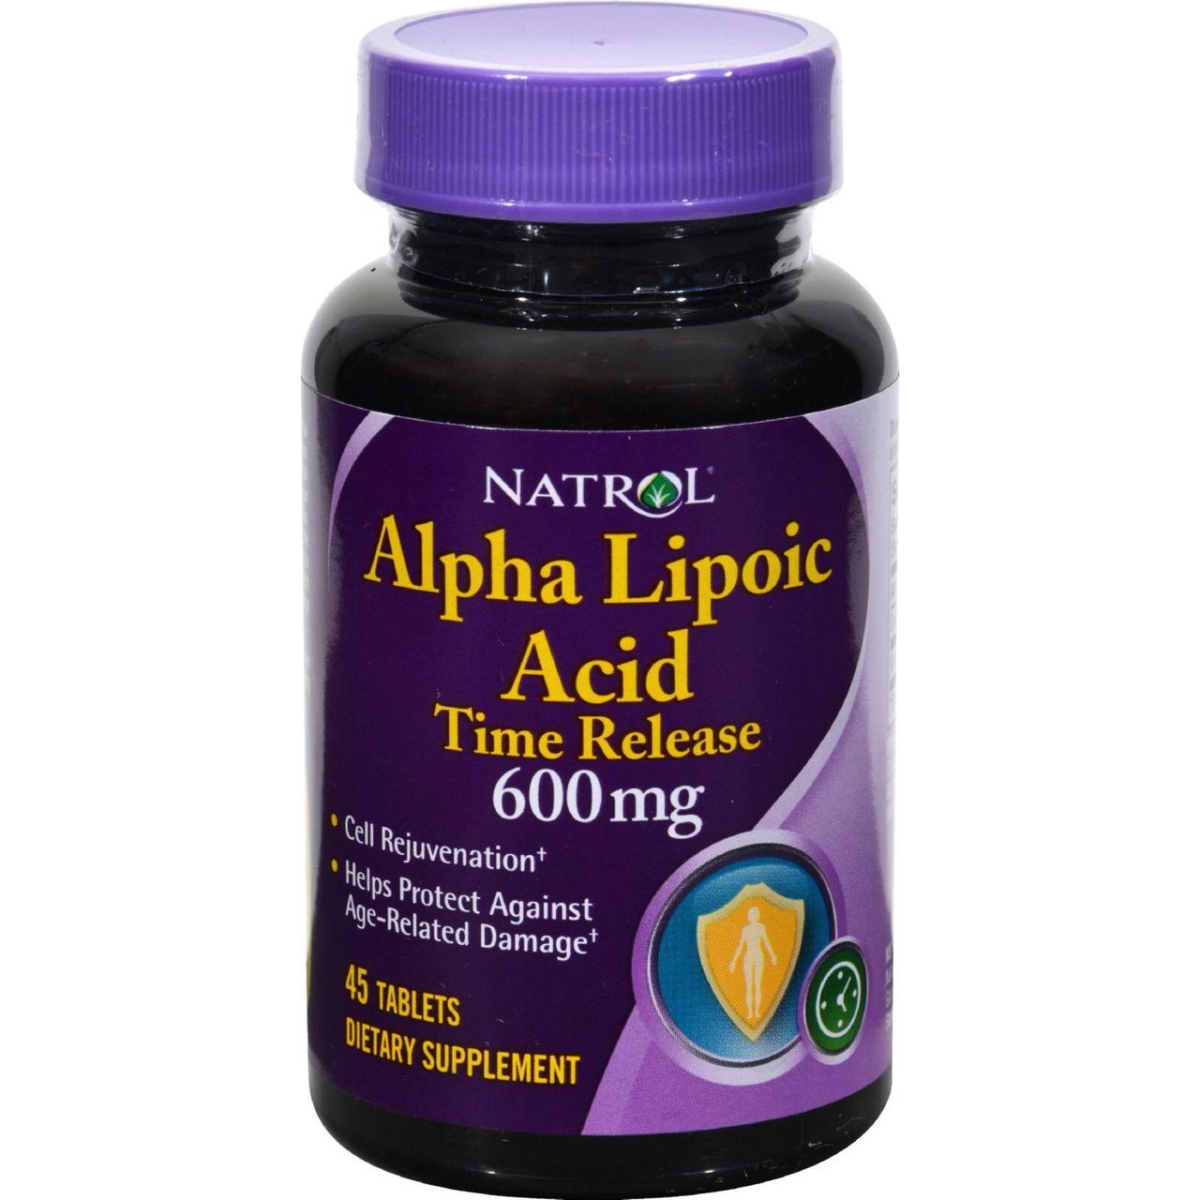 Picture of Natrol HG0592899 600 mg Alpha Lipoic Acid Time Release - 45 Tablets